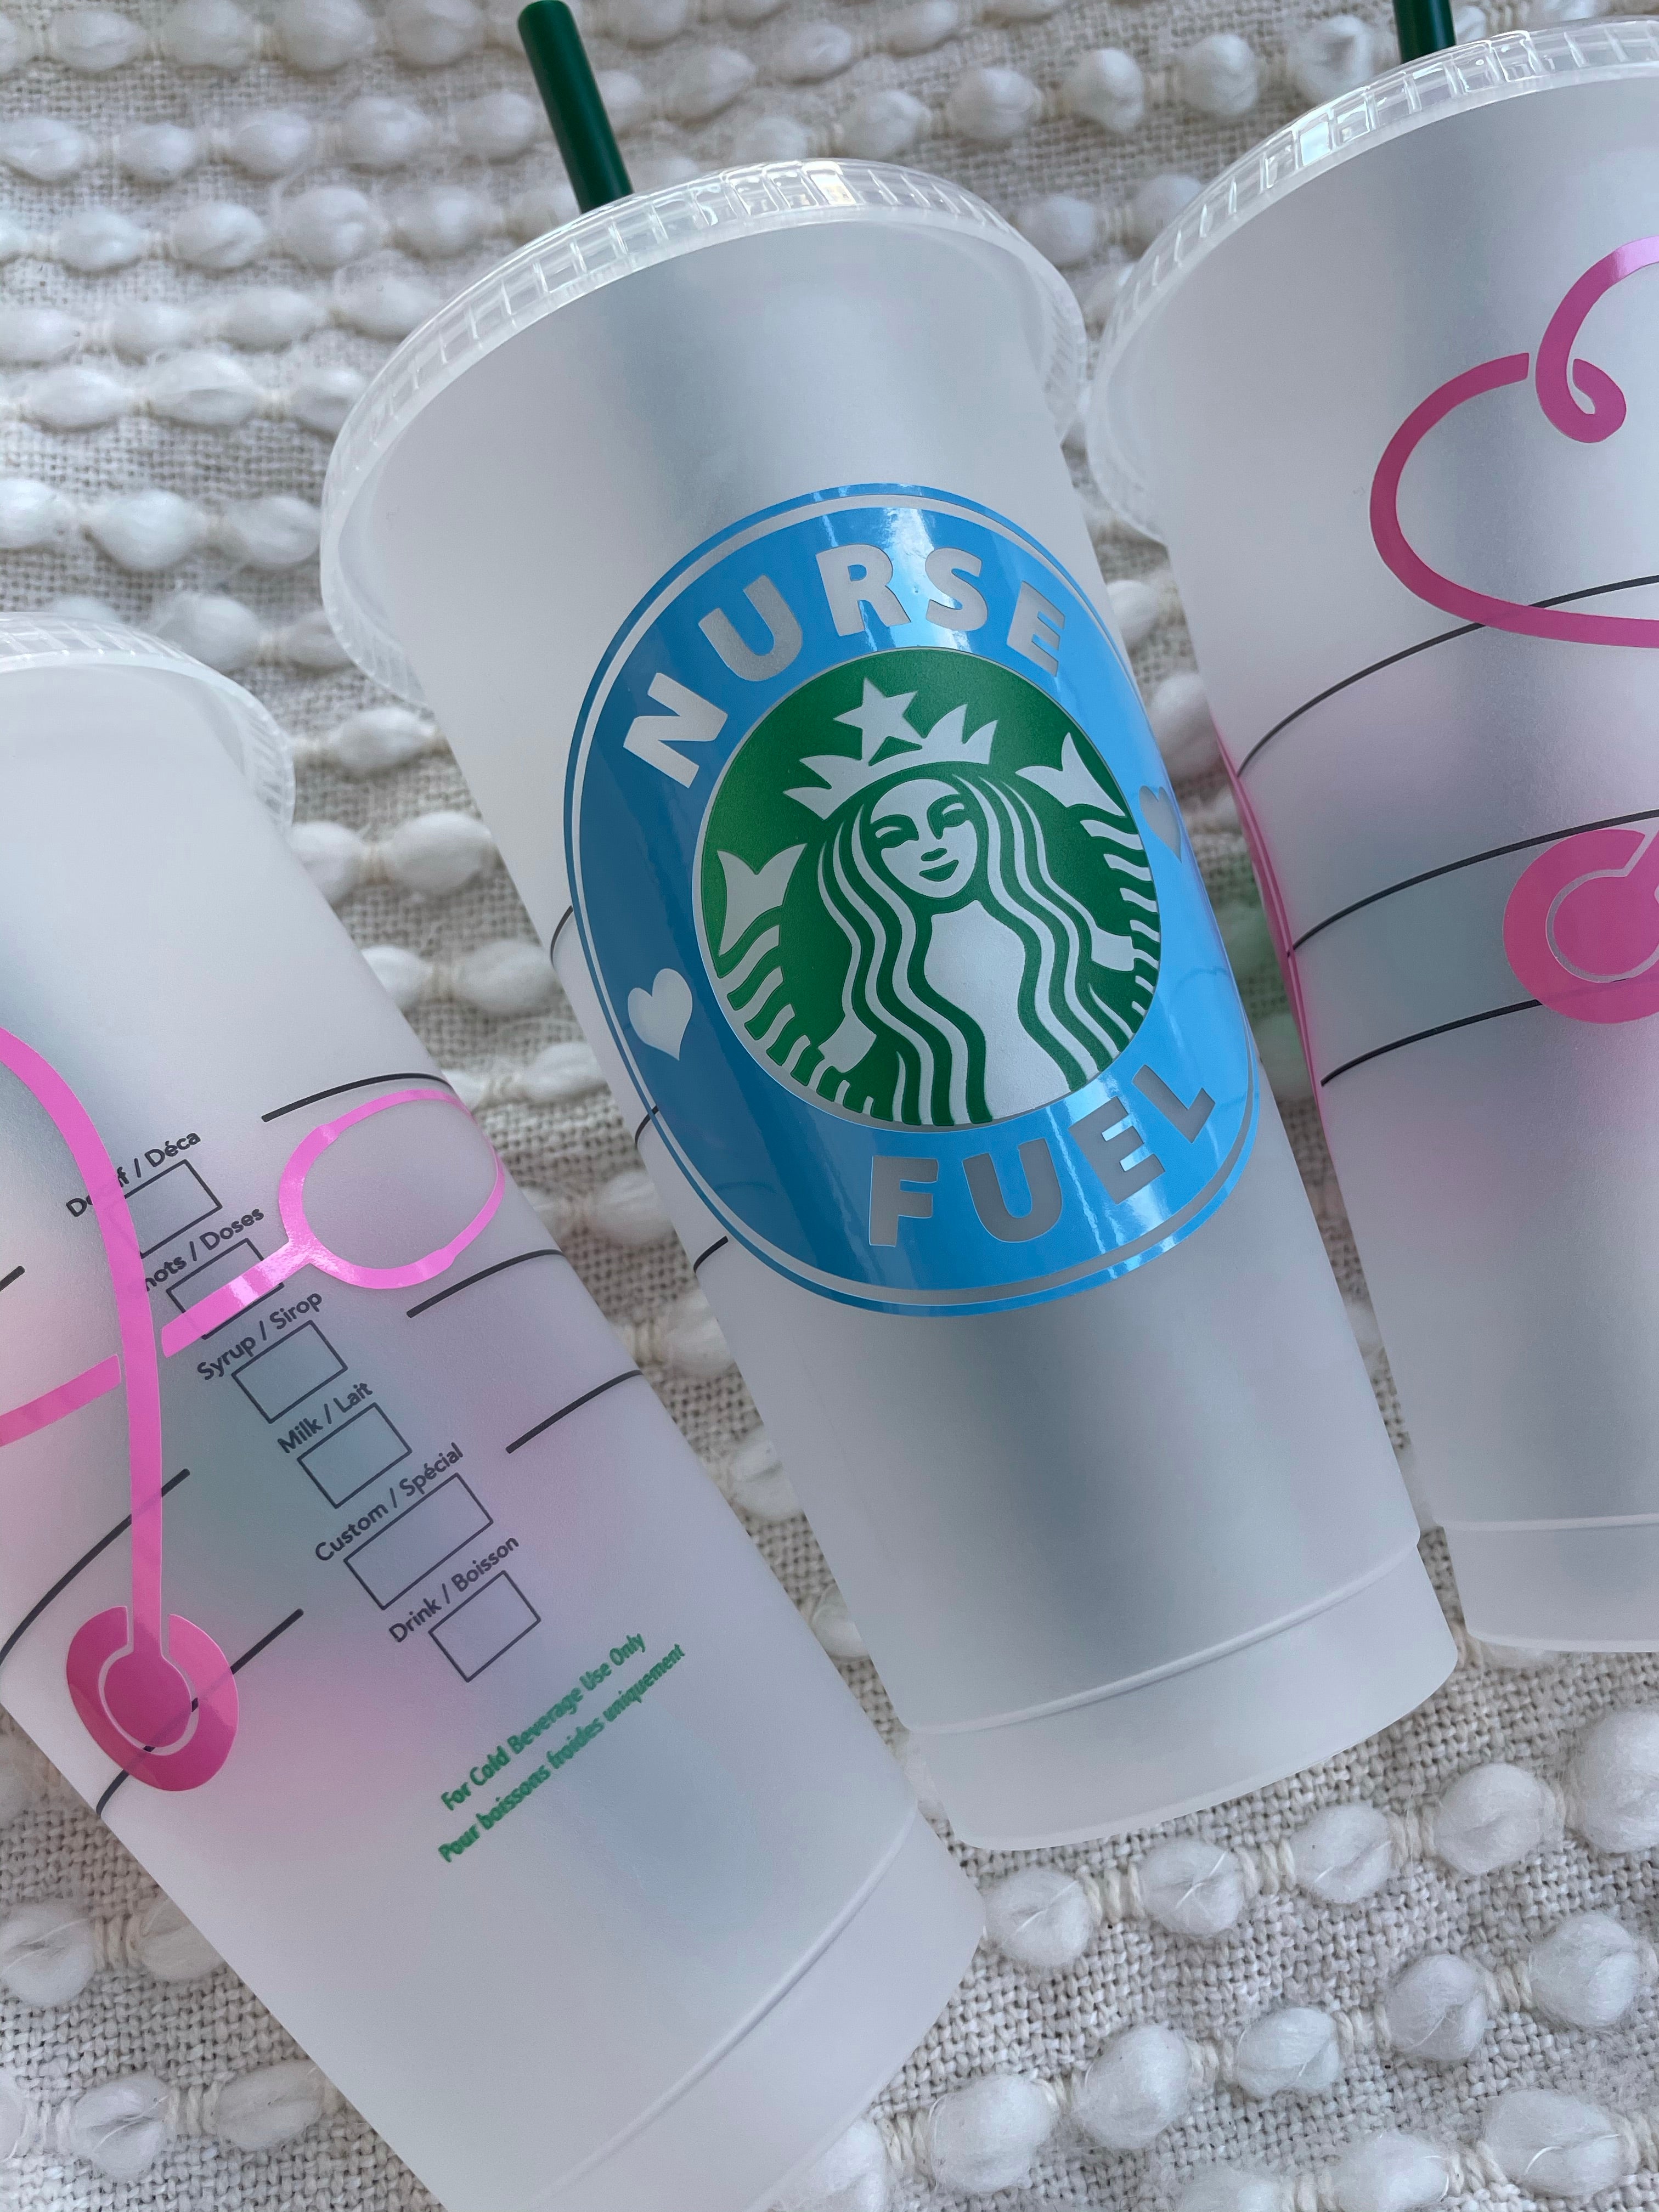 Nurse Fuel Starbucks Cup Personalized with School Colors